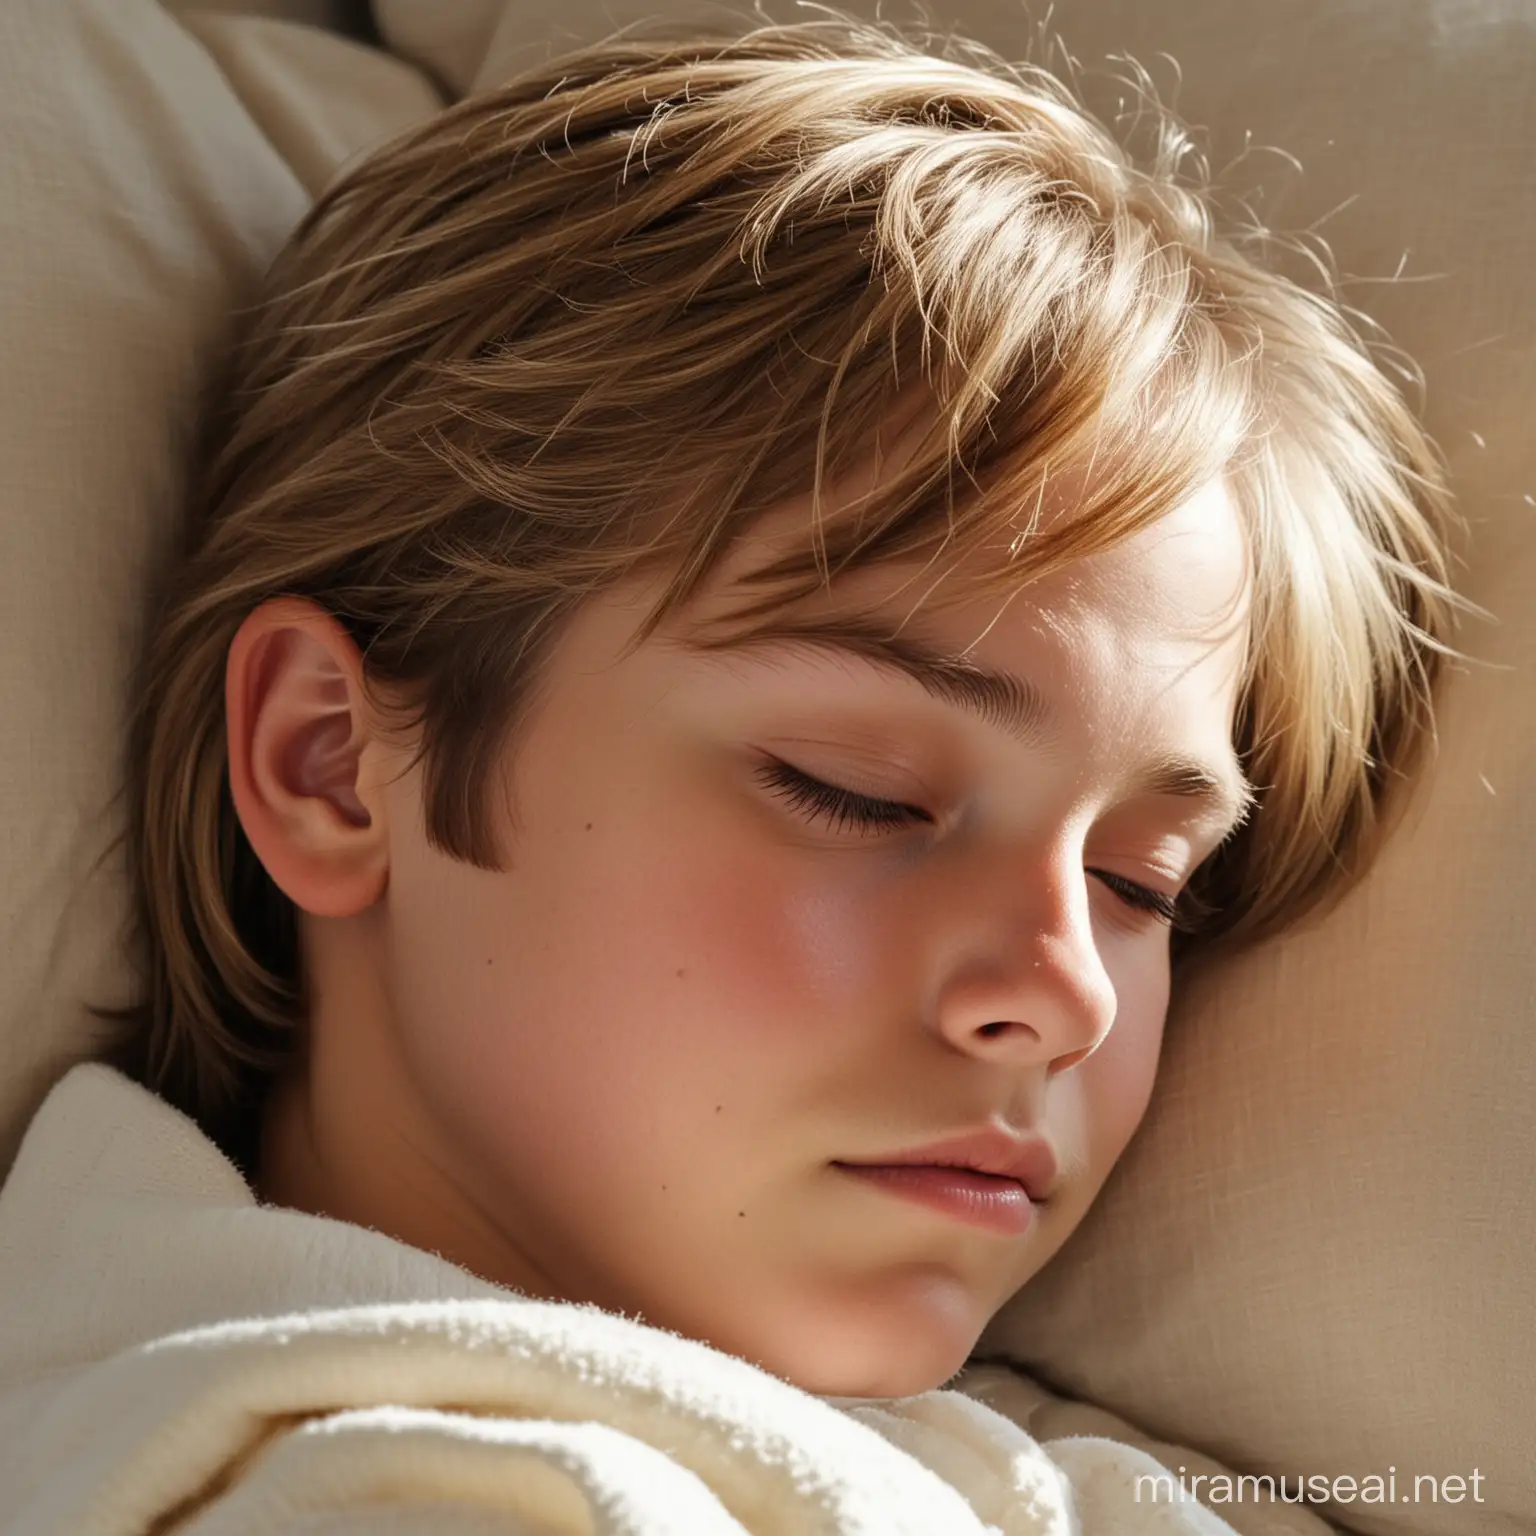 Sleeping eleven year old boy, soft shiny hair, ear length hair, head shot, sunlight, face turned to the right,  portrait view